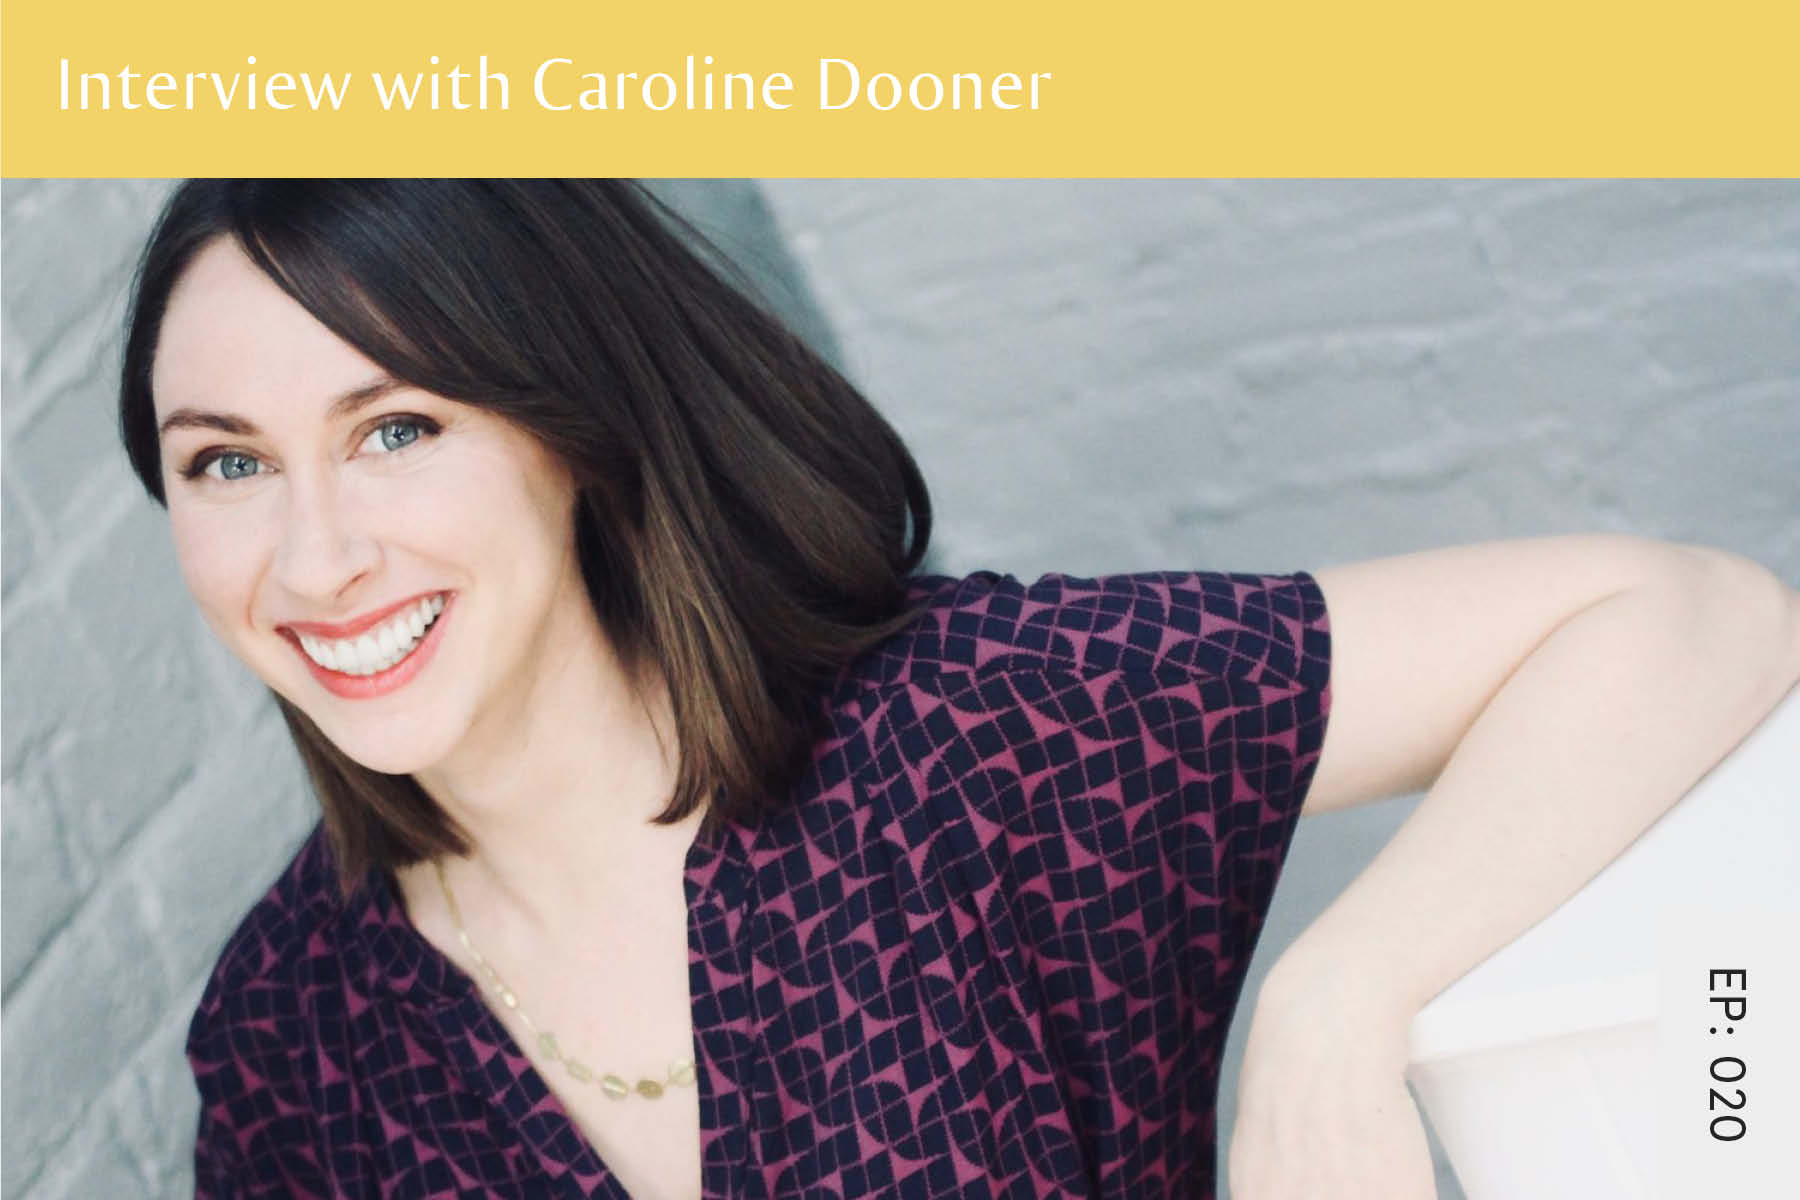 020: Interview with Caroline Dooner - Seven Health: Eating Disorder Recovery and Anti Diet Nutritionist